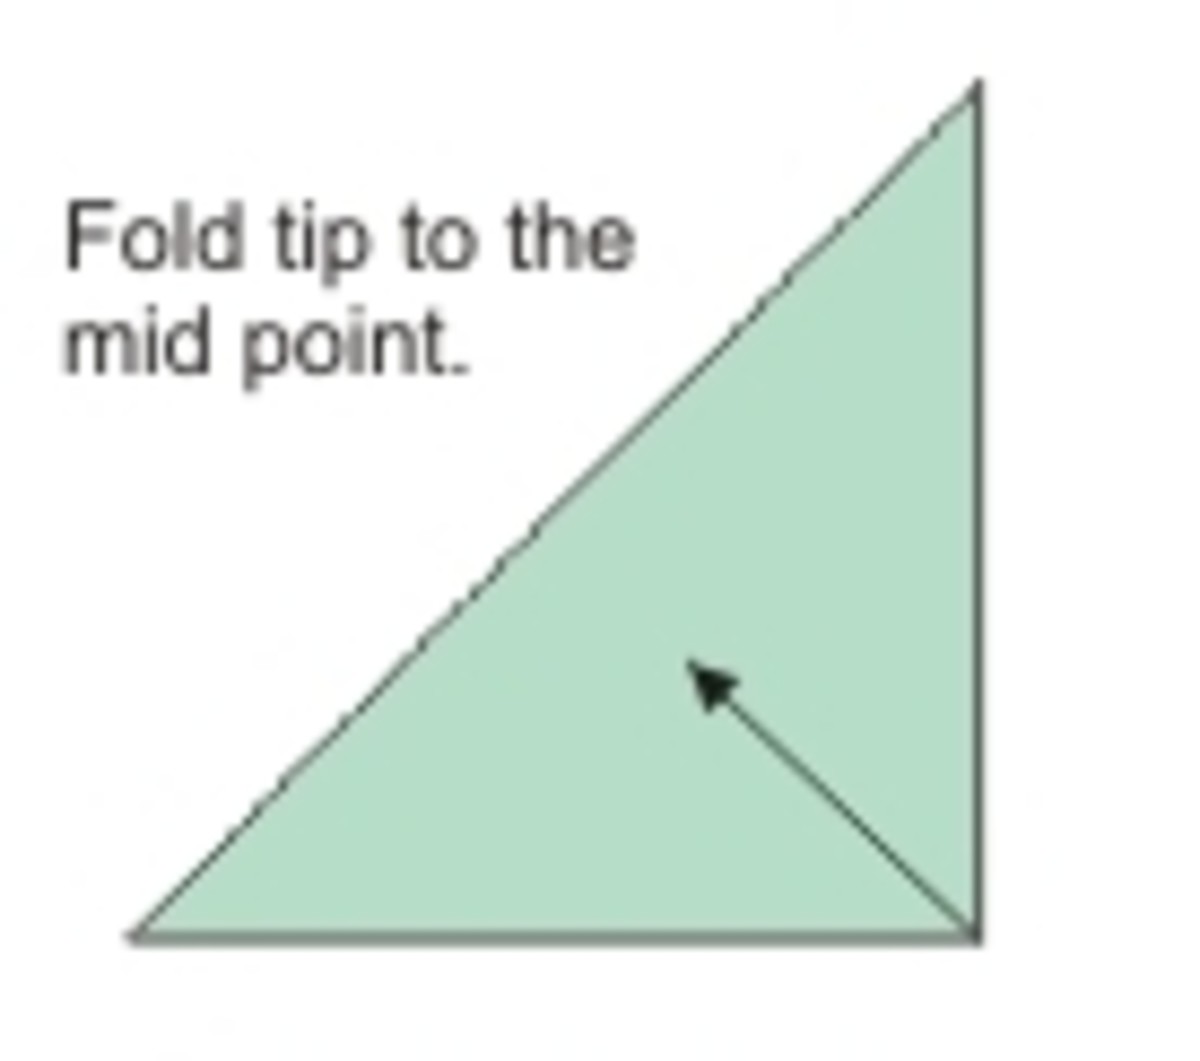 Fold the tip to the mid point